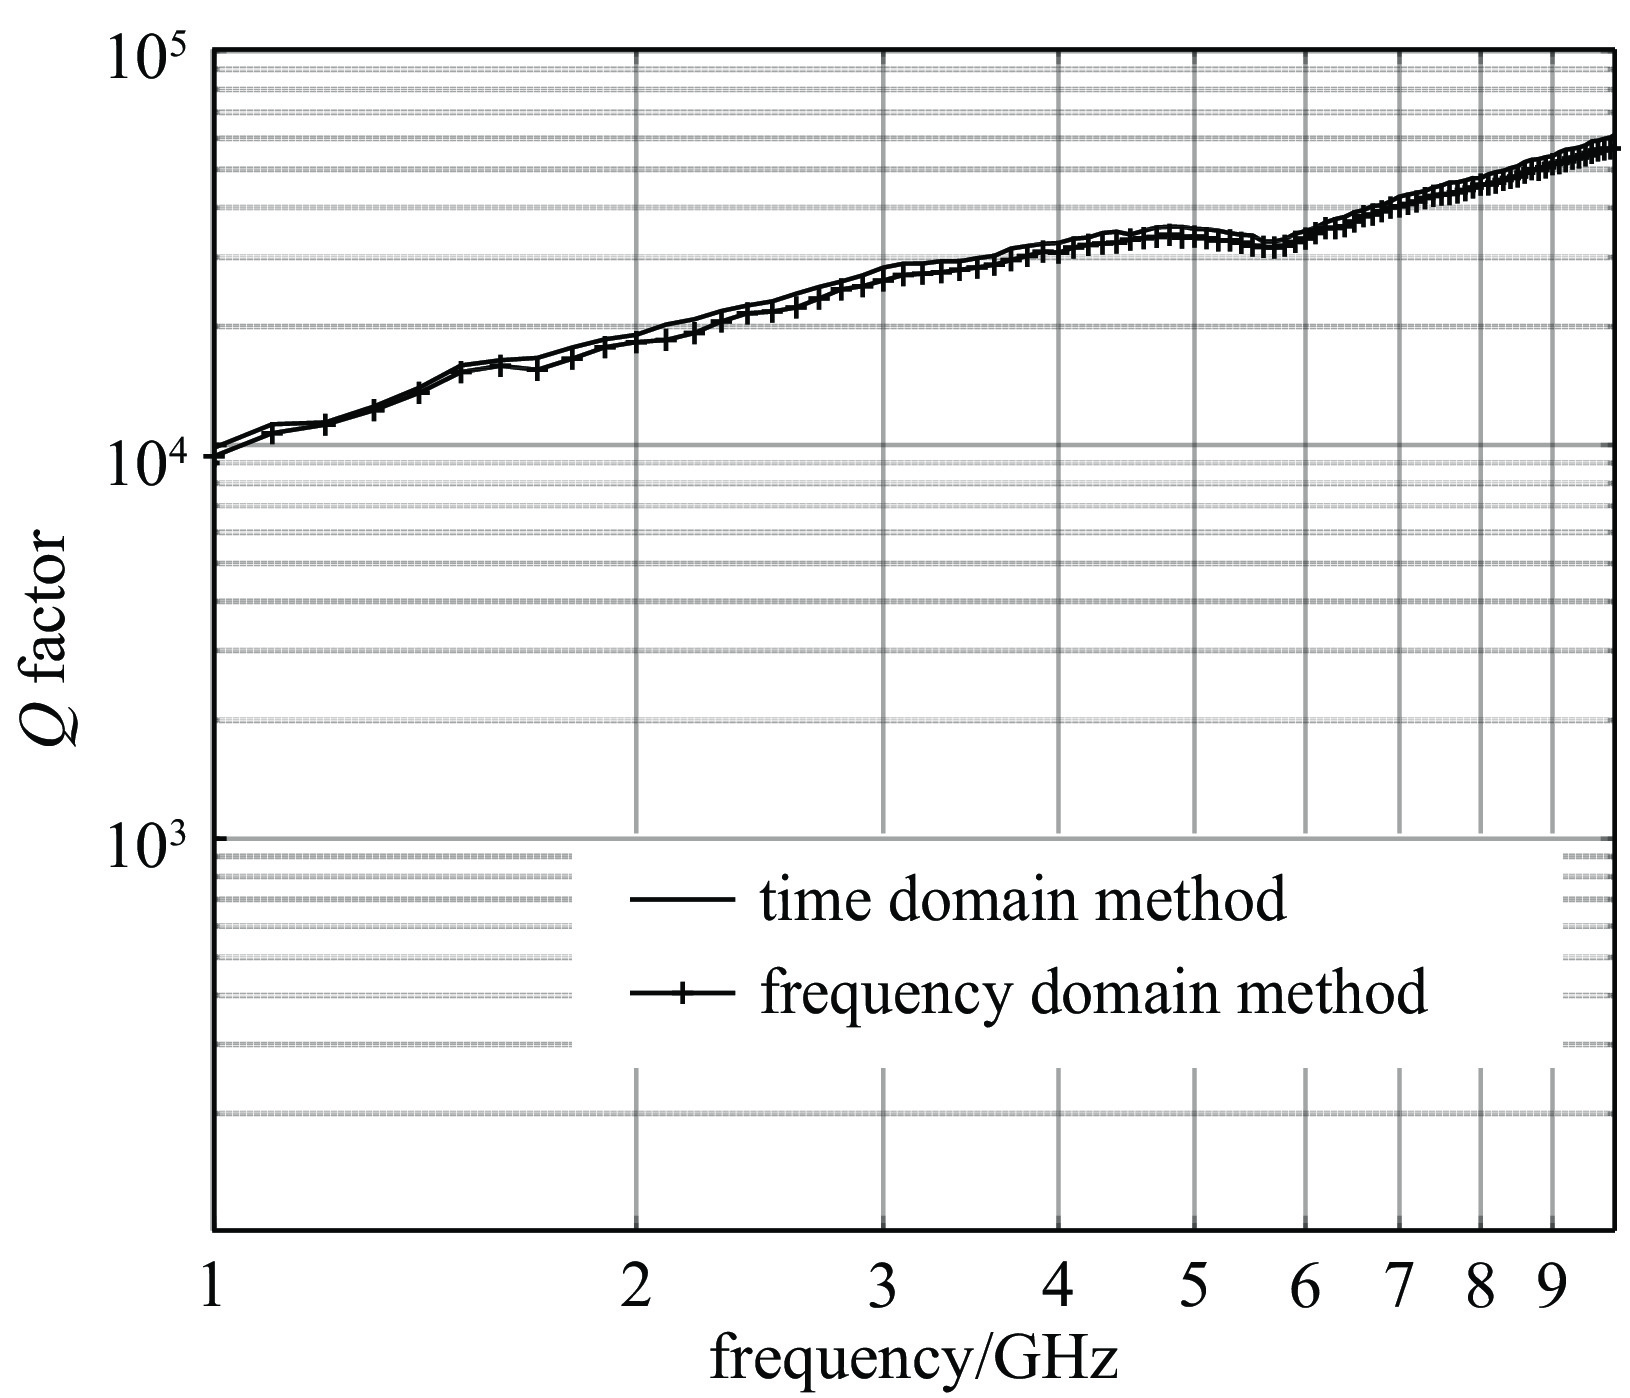 Comparison of the time domain and frequency domain method